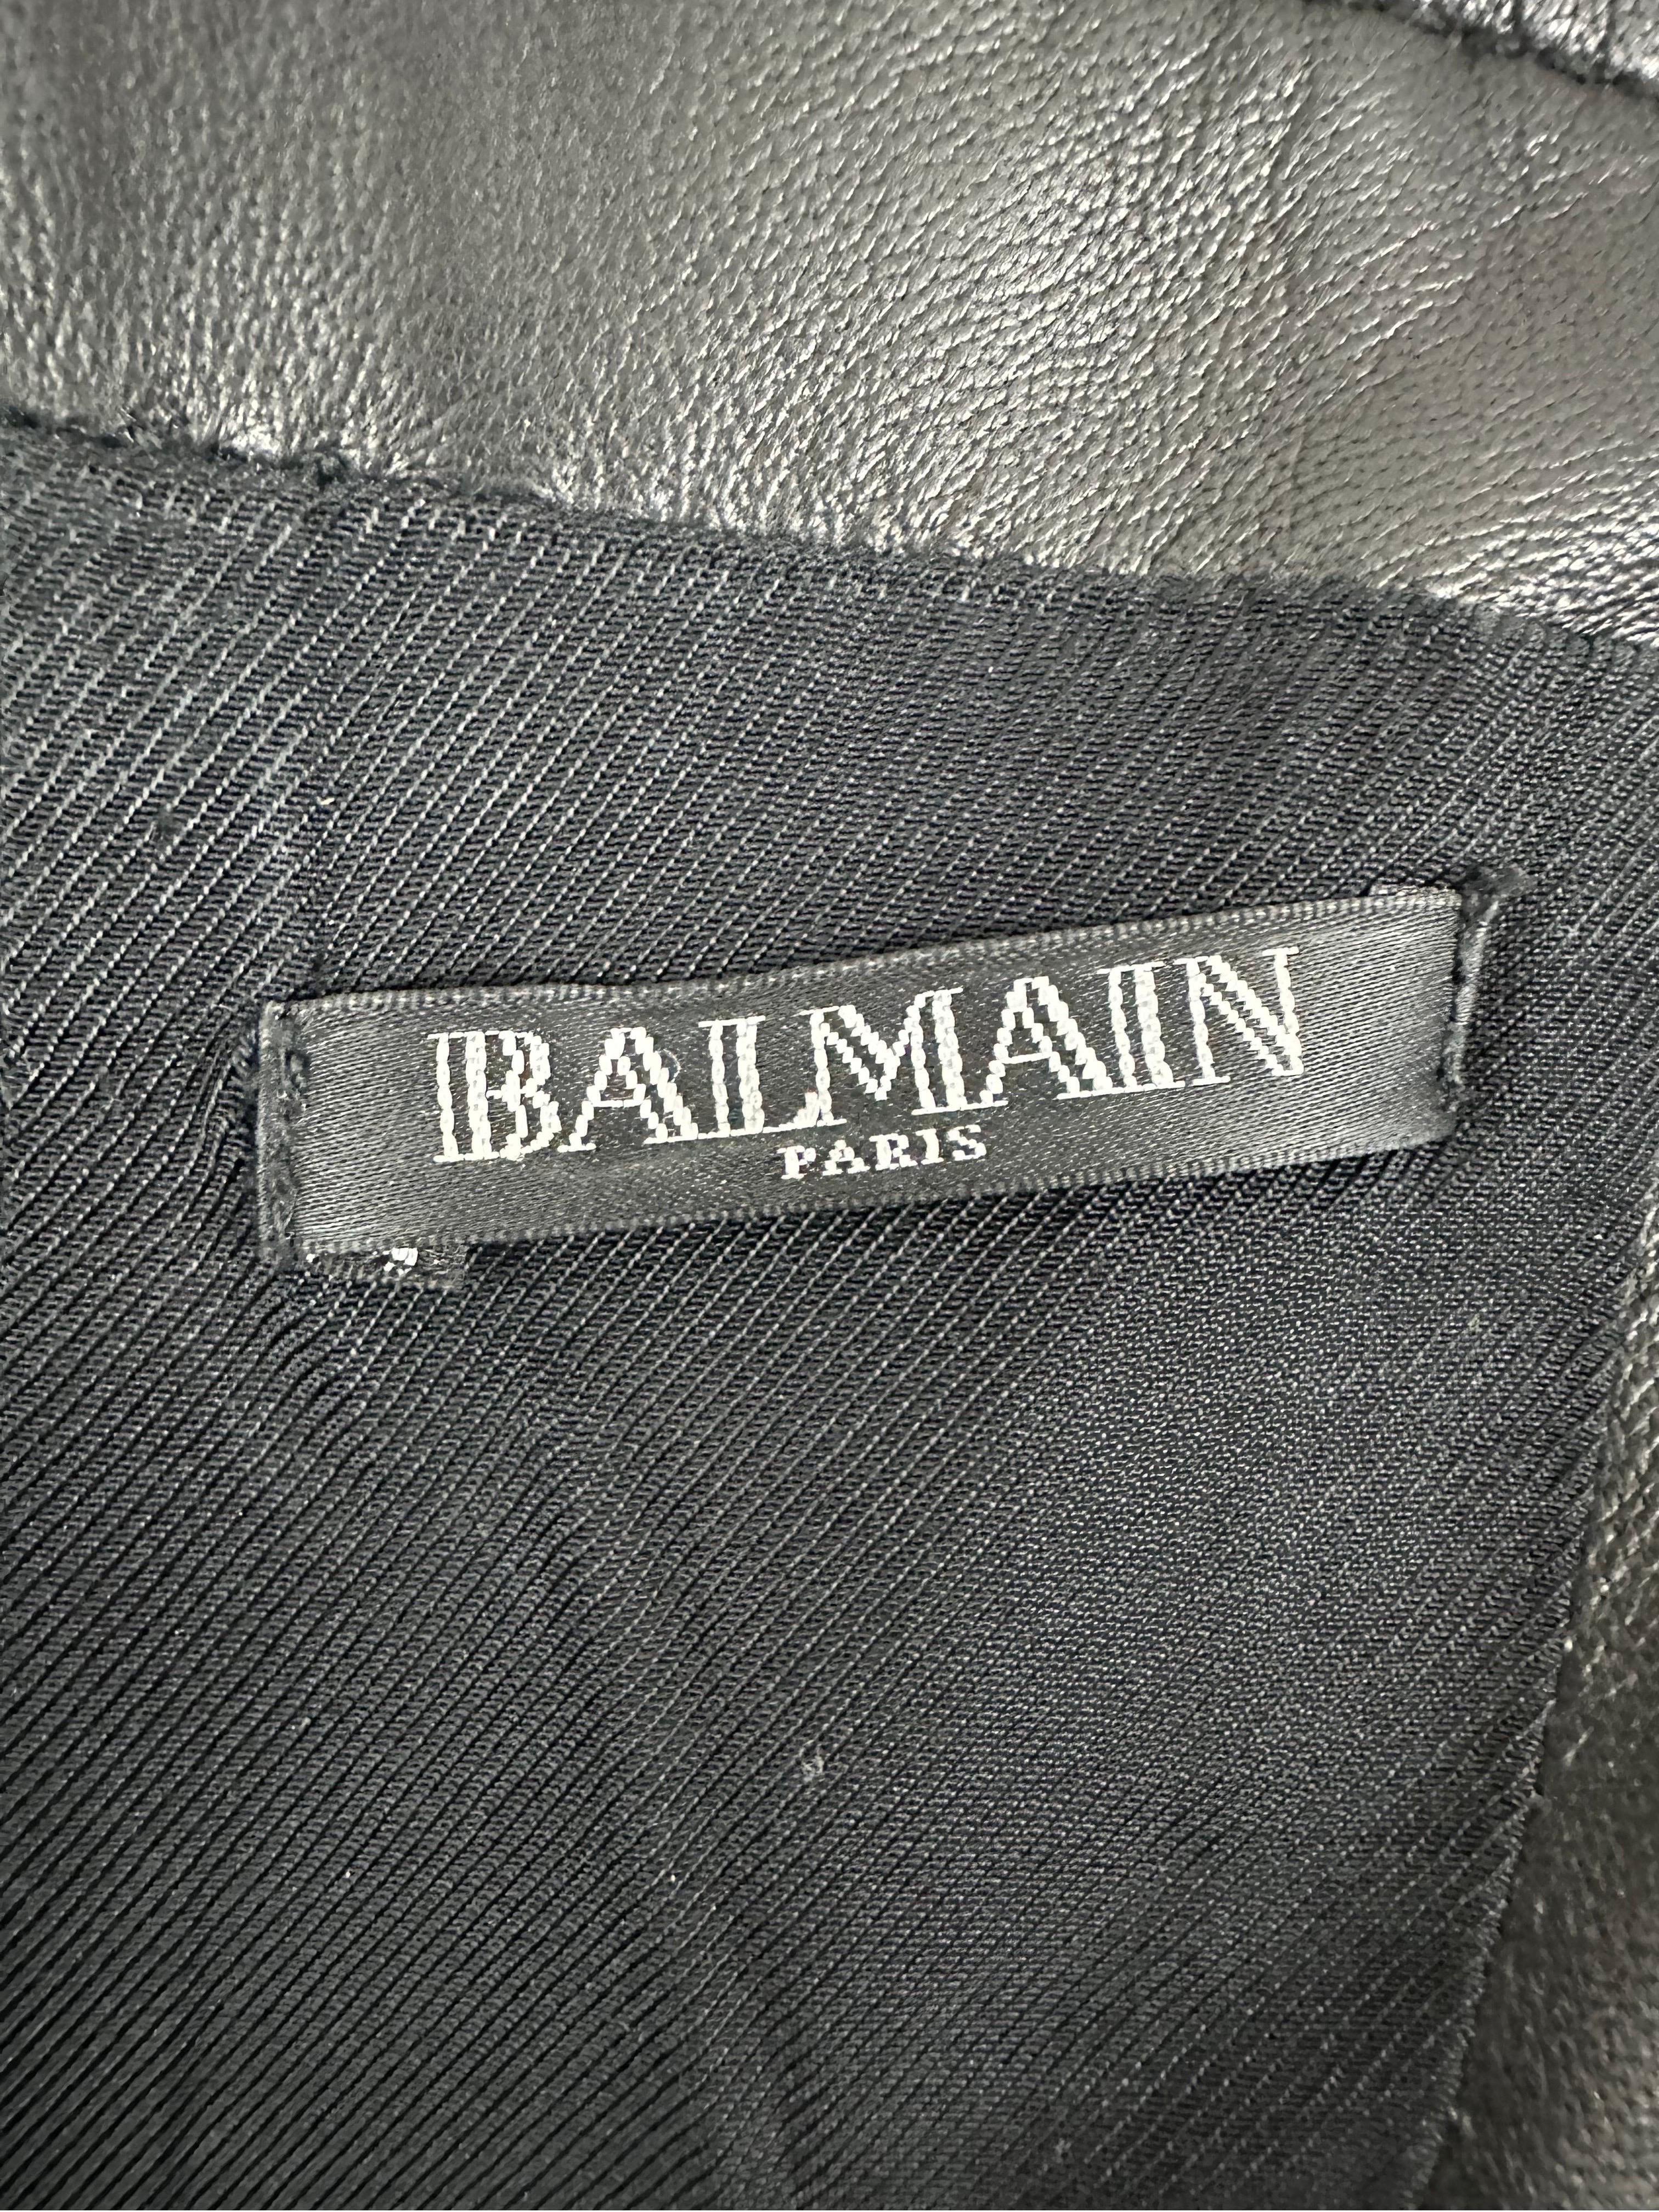 Balmain one shoulder pleated leather top Pre fall 2015 For Sale 6